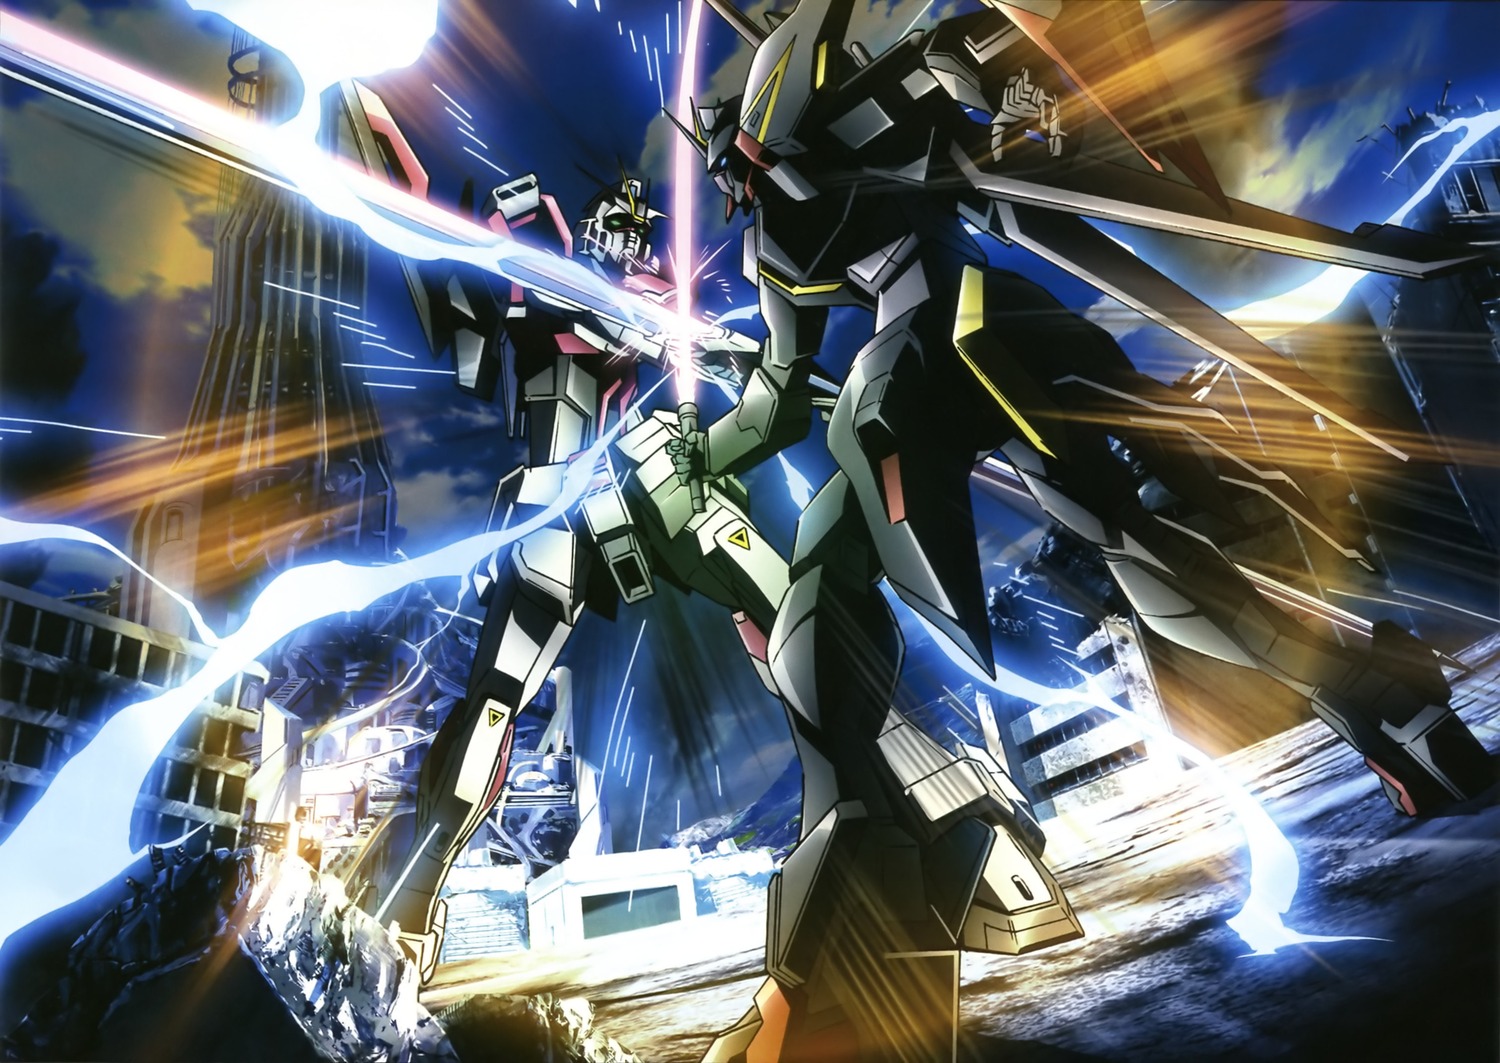 Gundam Seed Destiny Hd Remastered Project Gundam Kits Collection News And Reviews